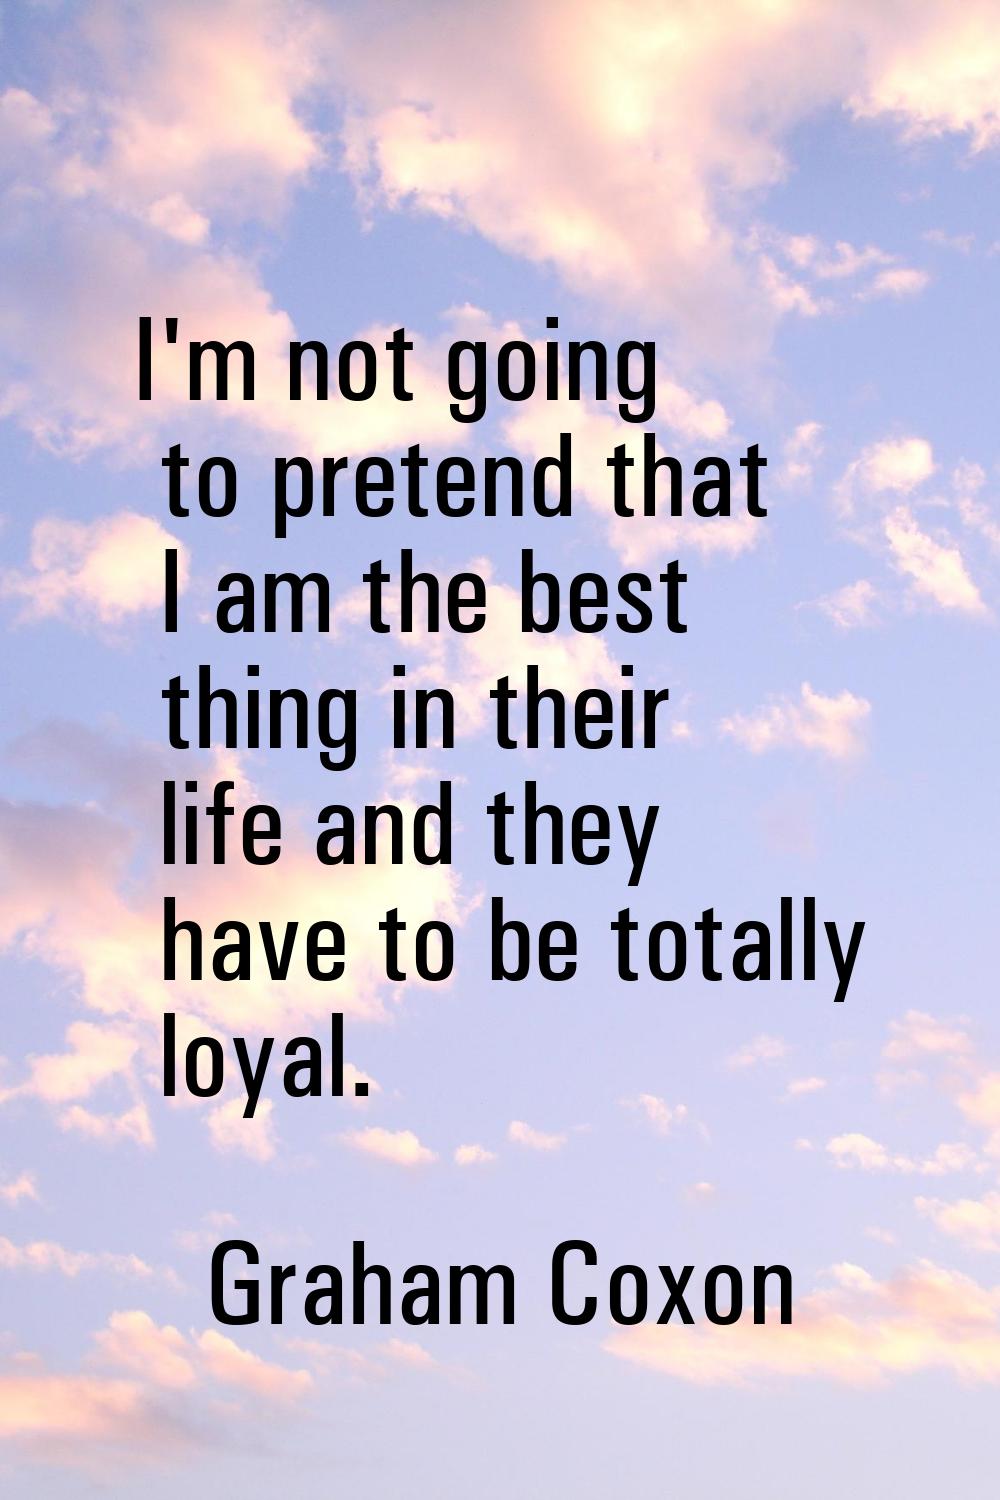 I'm not going to pretend that I am the best thing in their life and they have to be totally loyal.